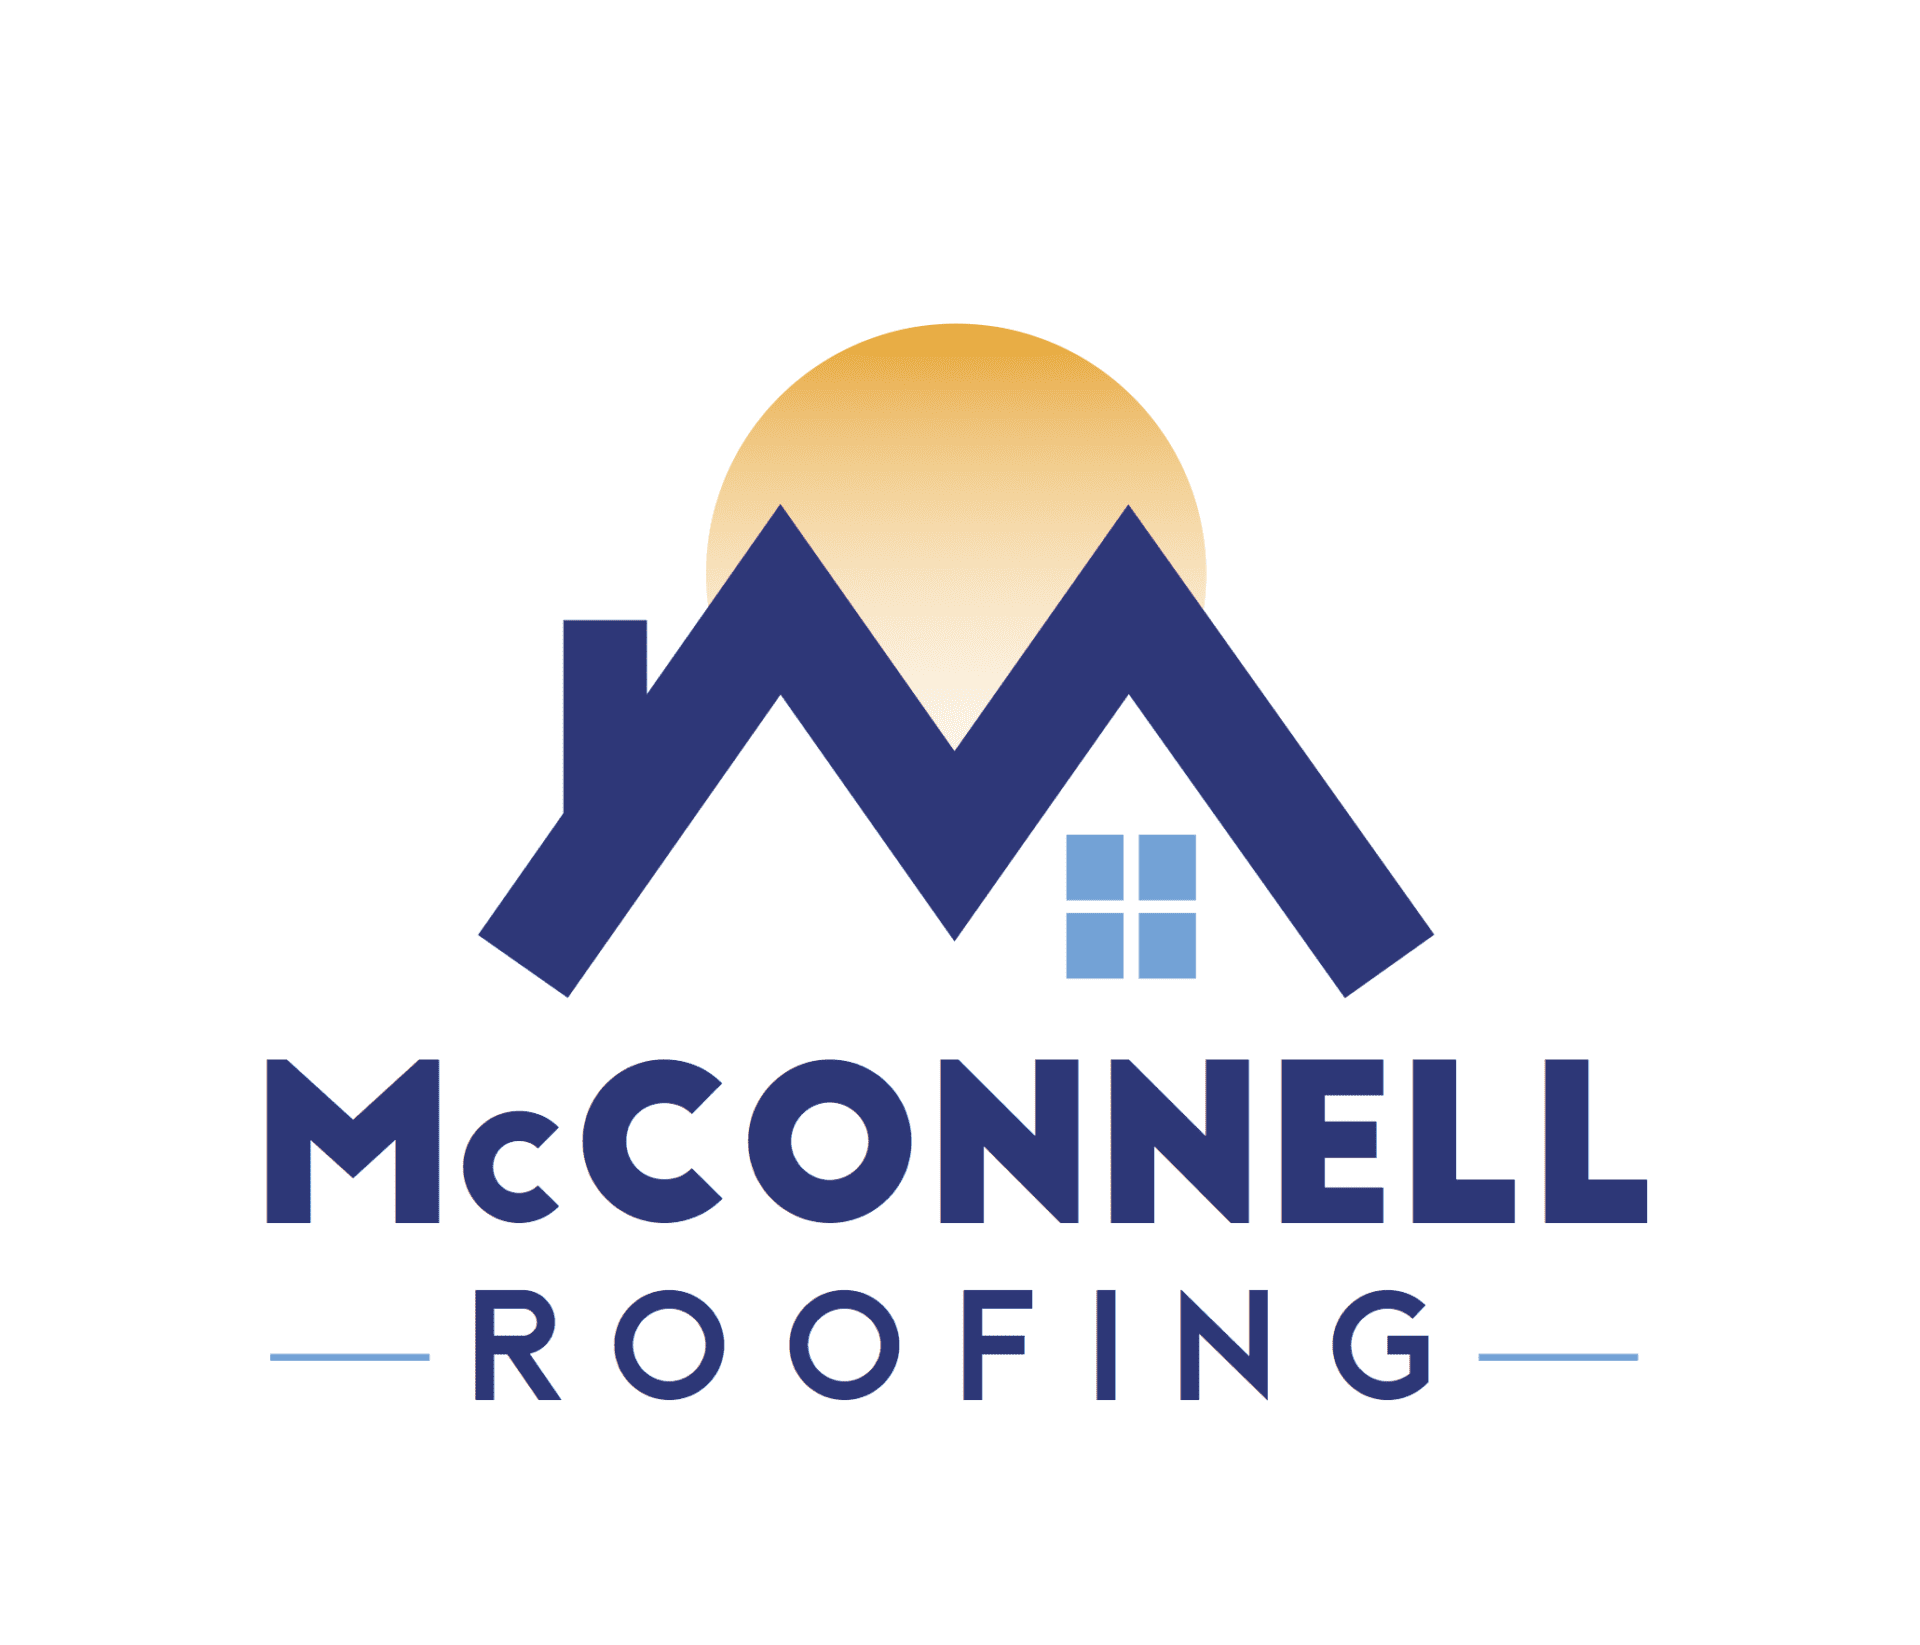 McConnell Roofing